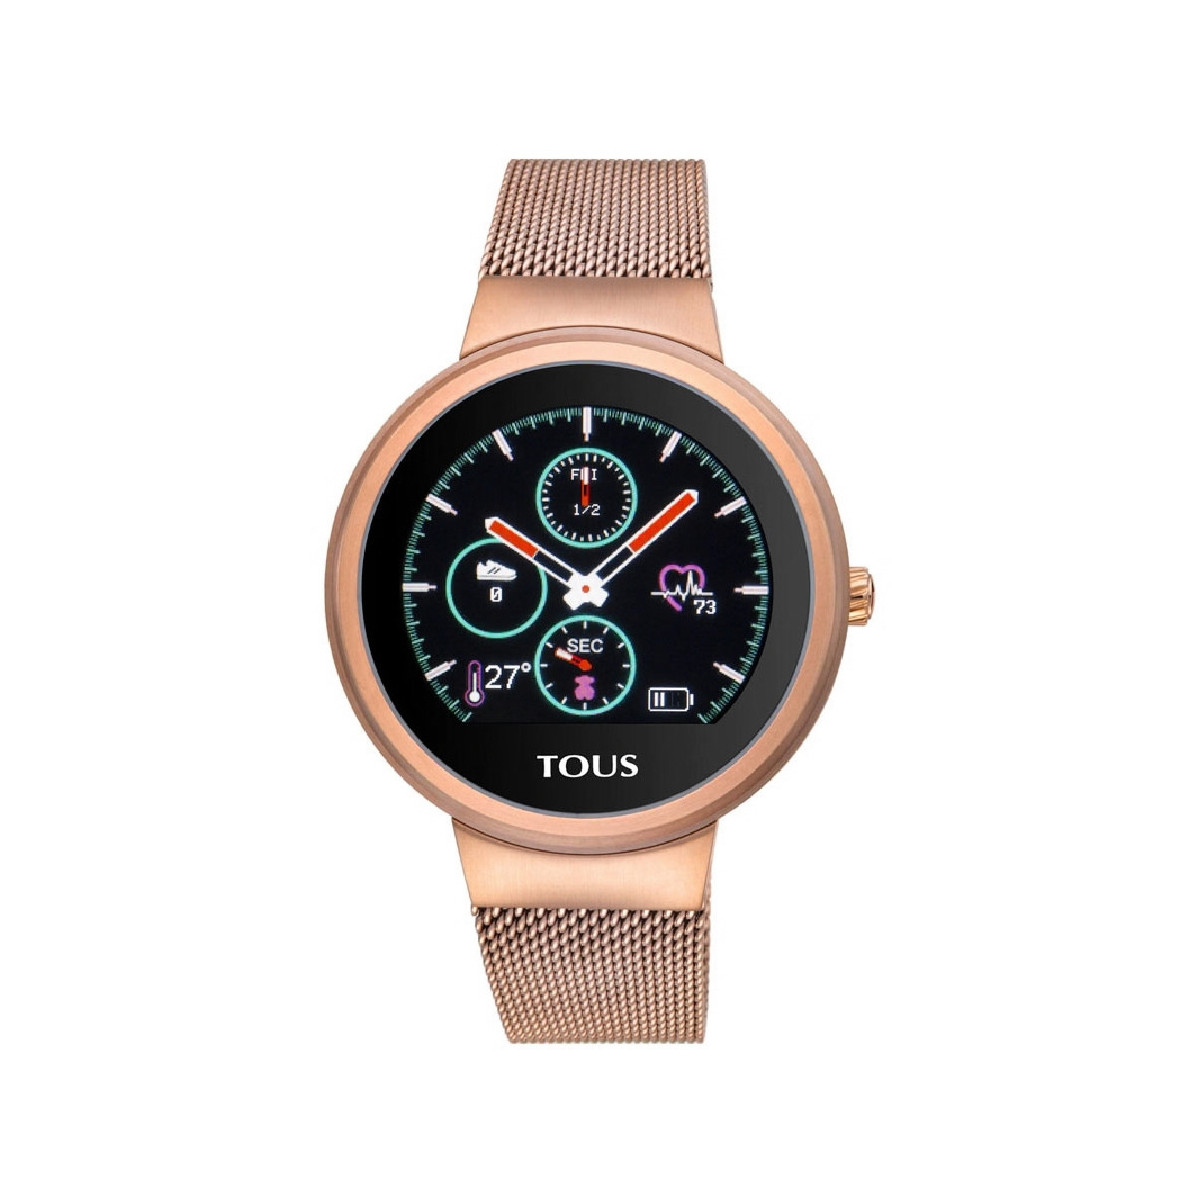 RELOJ TOUS ACTIVITY ROND TOUCH - 000351650